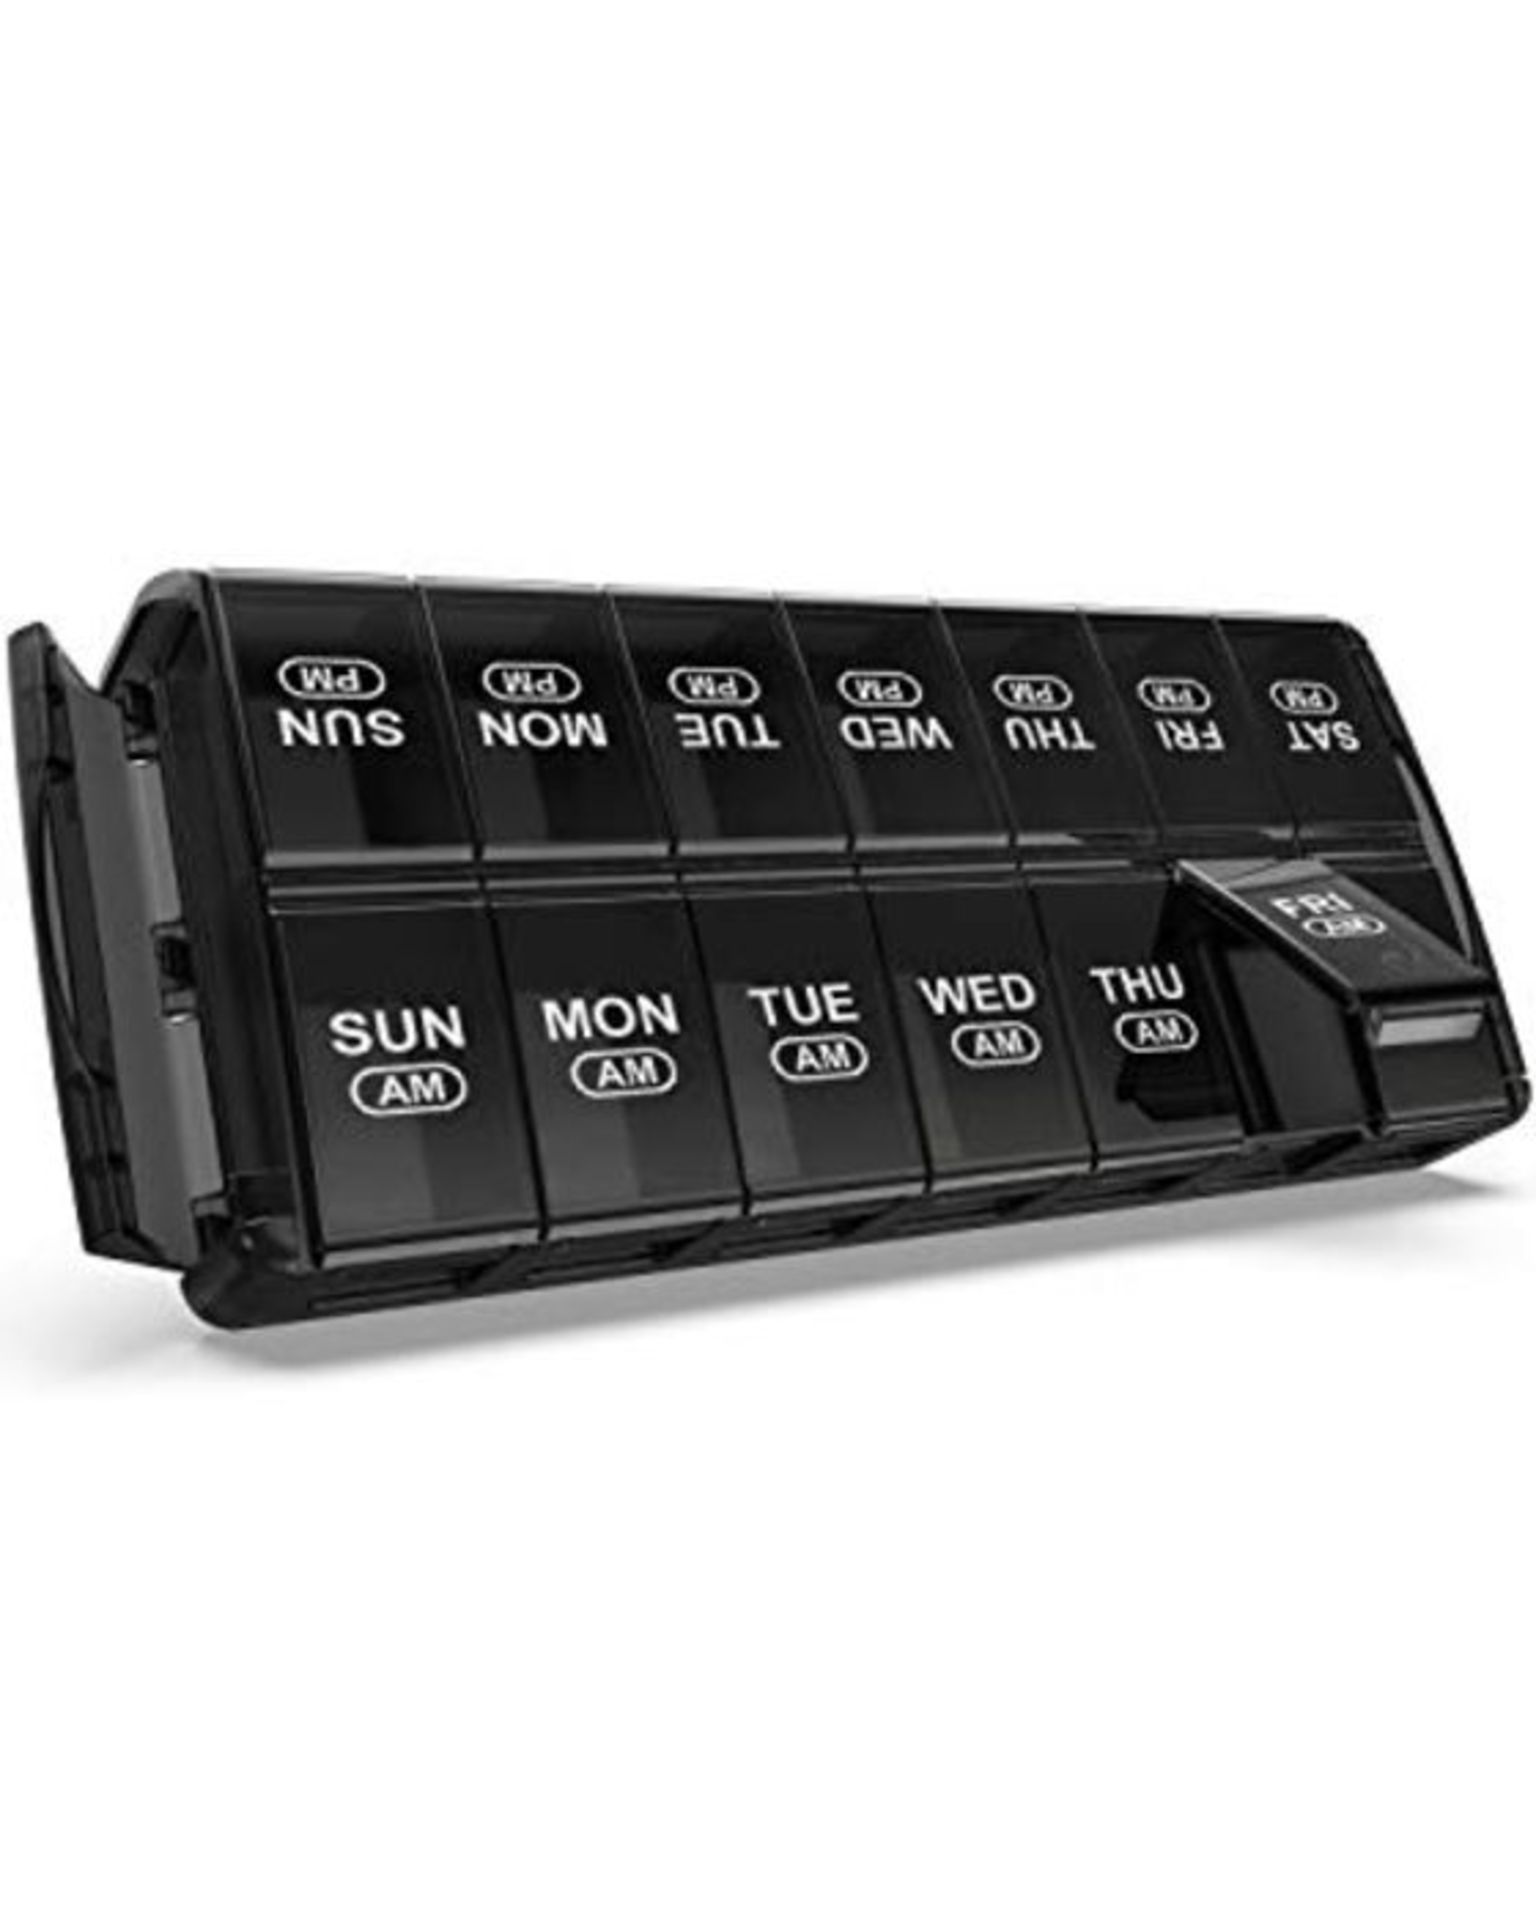 SUKUOS Pill Box 7 Day AM PM (Twice a Day) Quick Fill Weekly Pill Box Case 2020 Version